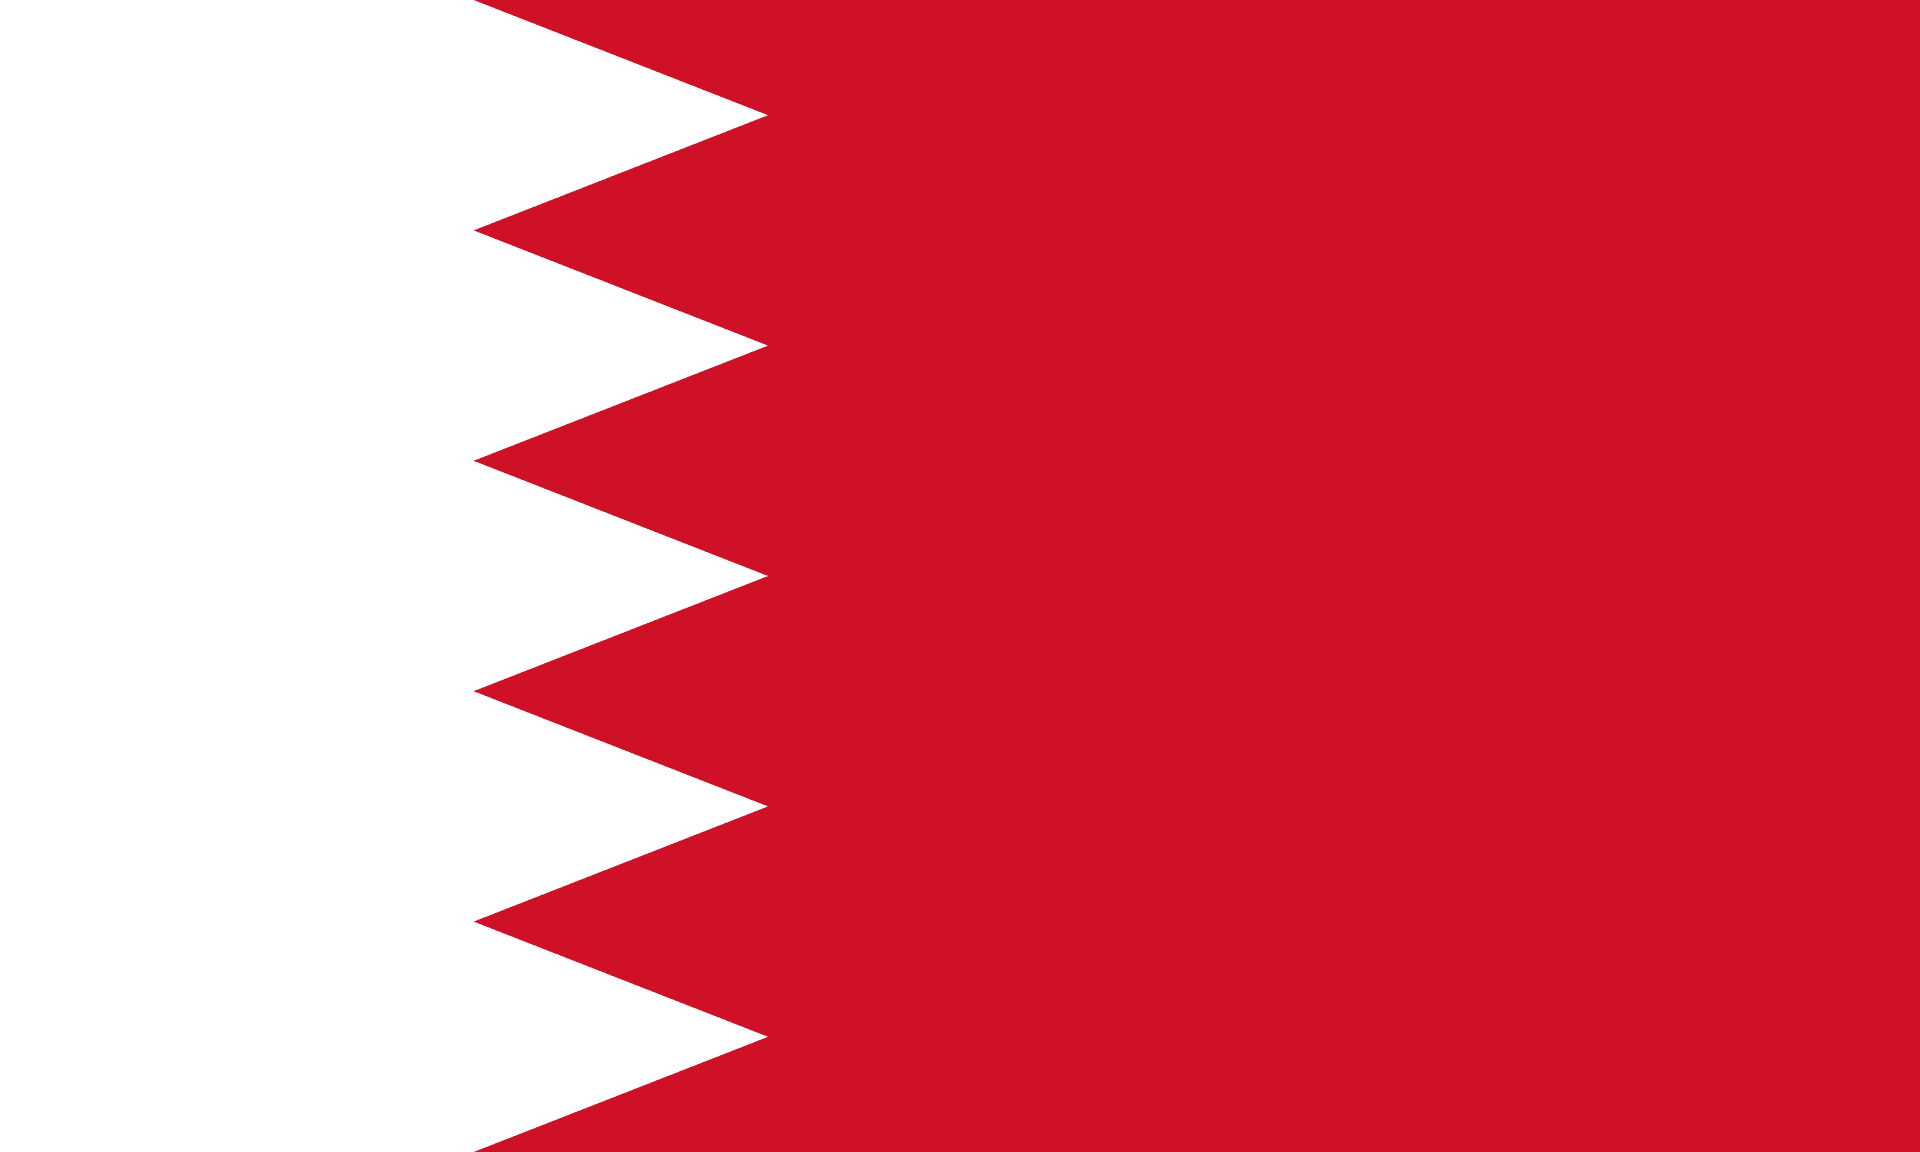 Facts about Bahrain